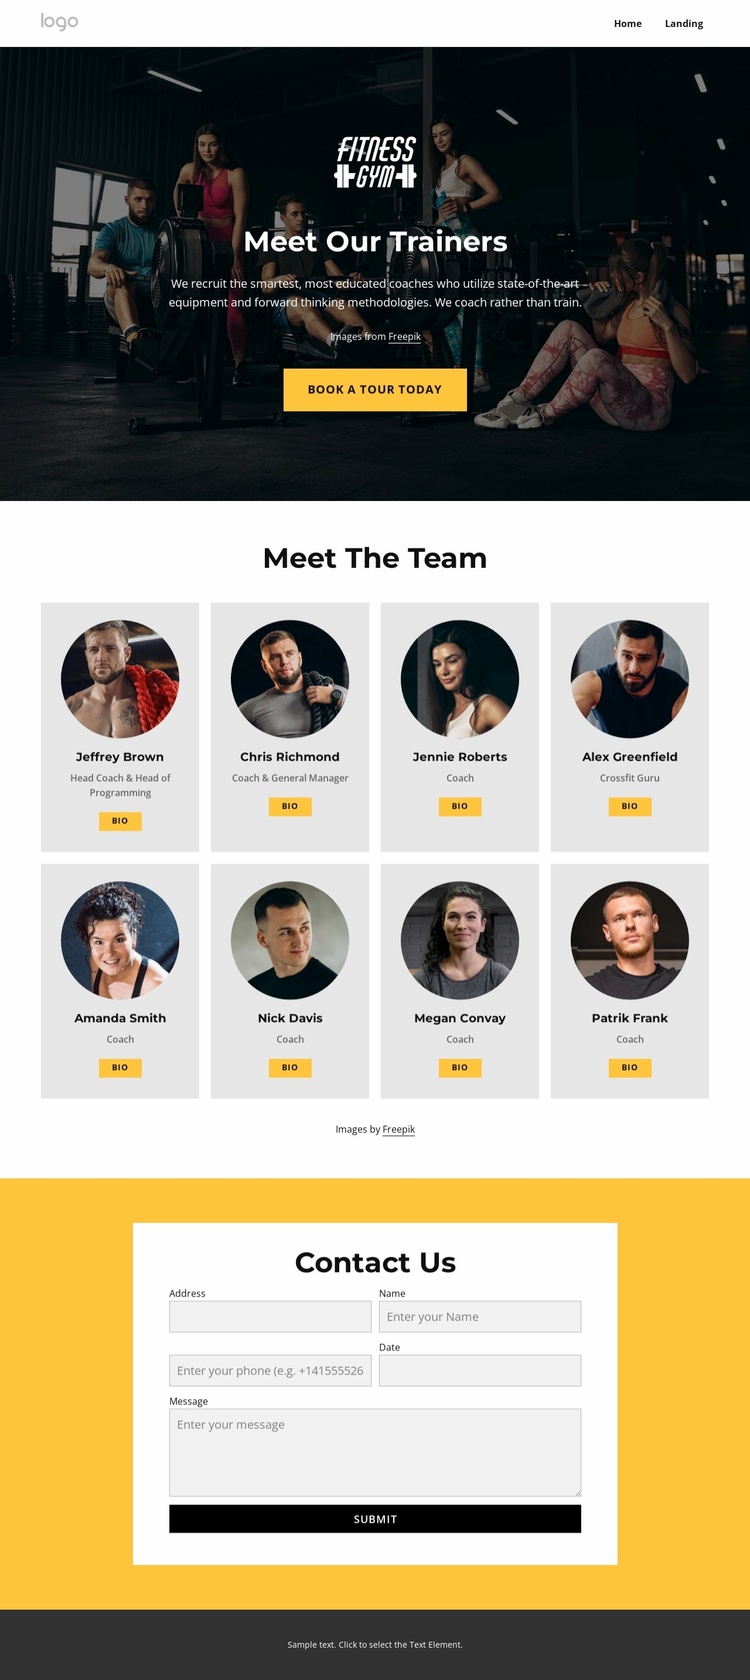 Meet our trainers eCommerce Template